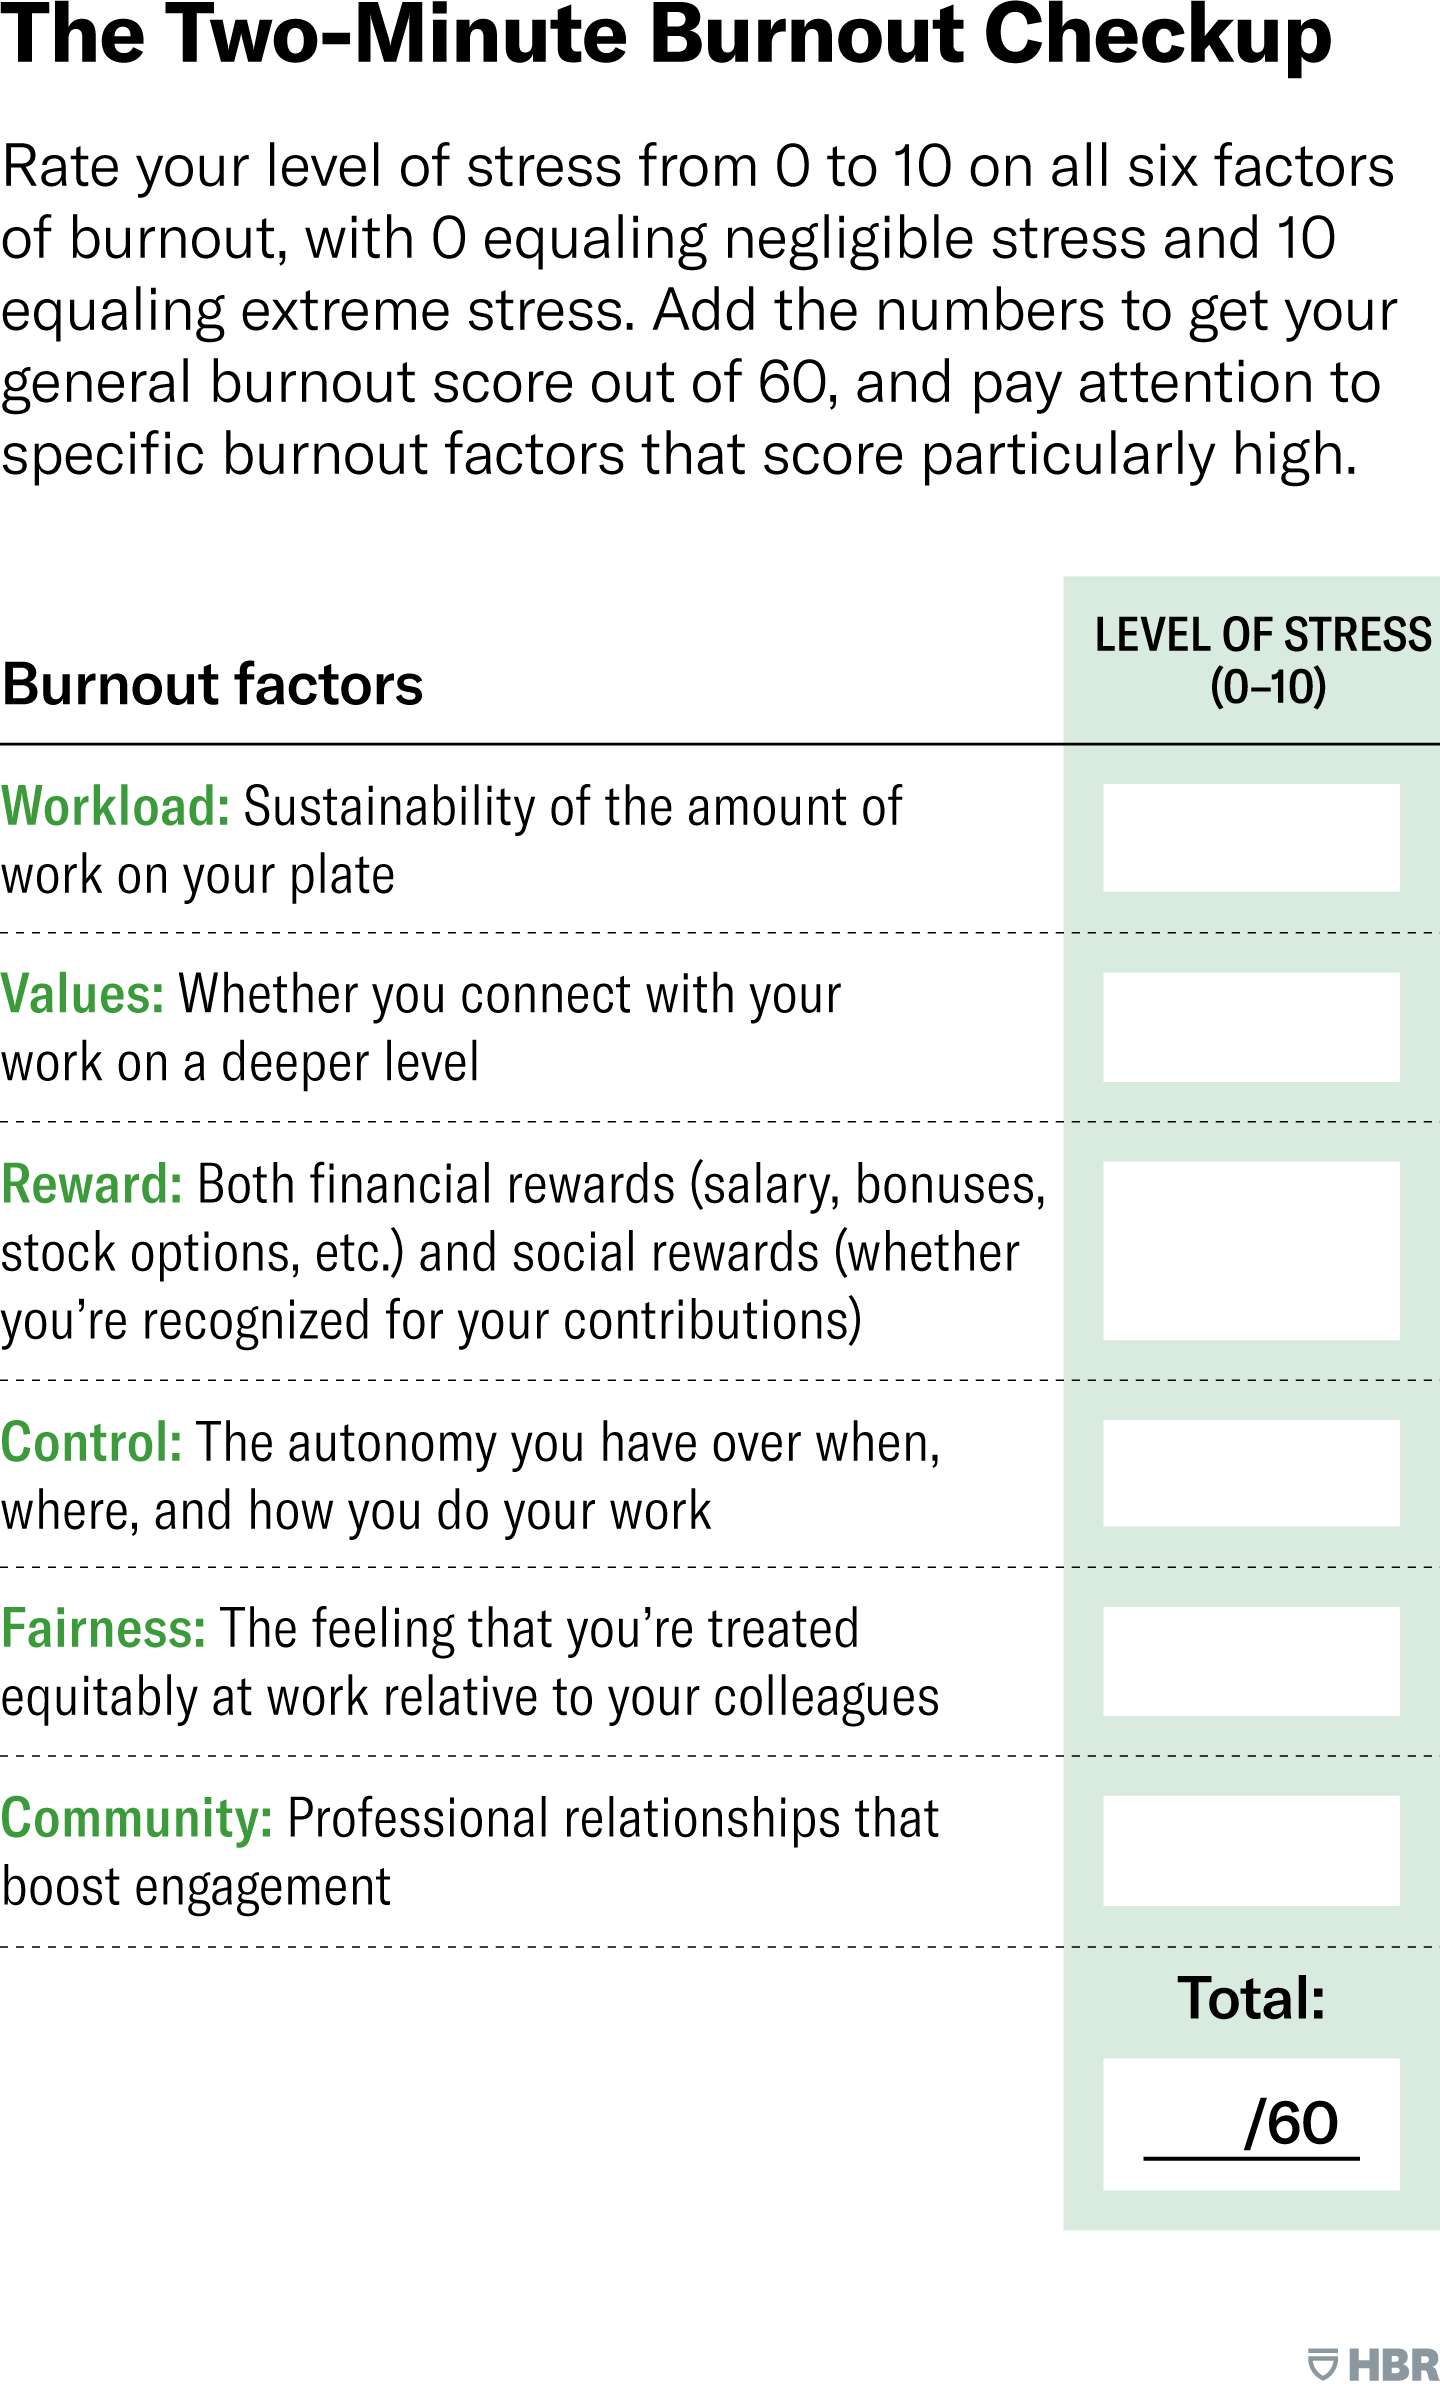 Rate your level of stress from 0 to 10 on all six factors of burnout, with 0 equaling negligible stress and 10 equaling extreme stress. Add the numbers to get your general burnout score out of 60, and pay attention to specific burnout factors that score particularly high. A table lists the six burnout factors, with a column of blank spaces to record your level of stress for each factor and a spot at the bottom for the total score out of 60. The factors are: Workload: Sustainability of the amount of work on your plate. Values: Whether you connect with your work on a deeper level. Reward: Both financial rewards, such as salary, bonuses, stock options, etc, and social rewards, for example, whether you’re recognized for your contributions. Control: The autonomy you have over when, where, and how you do your work. Fairness: The feeling that you’re treated equitably at work relative to your colleagues. Community: Professional relationships that boost engagement. 